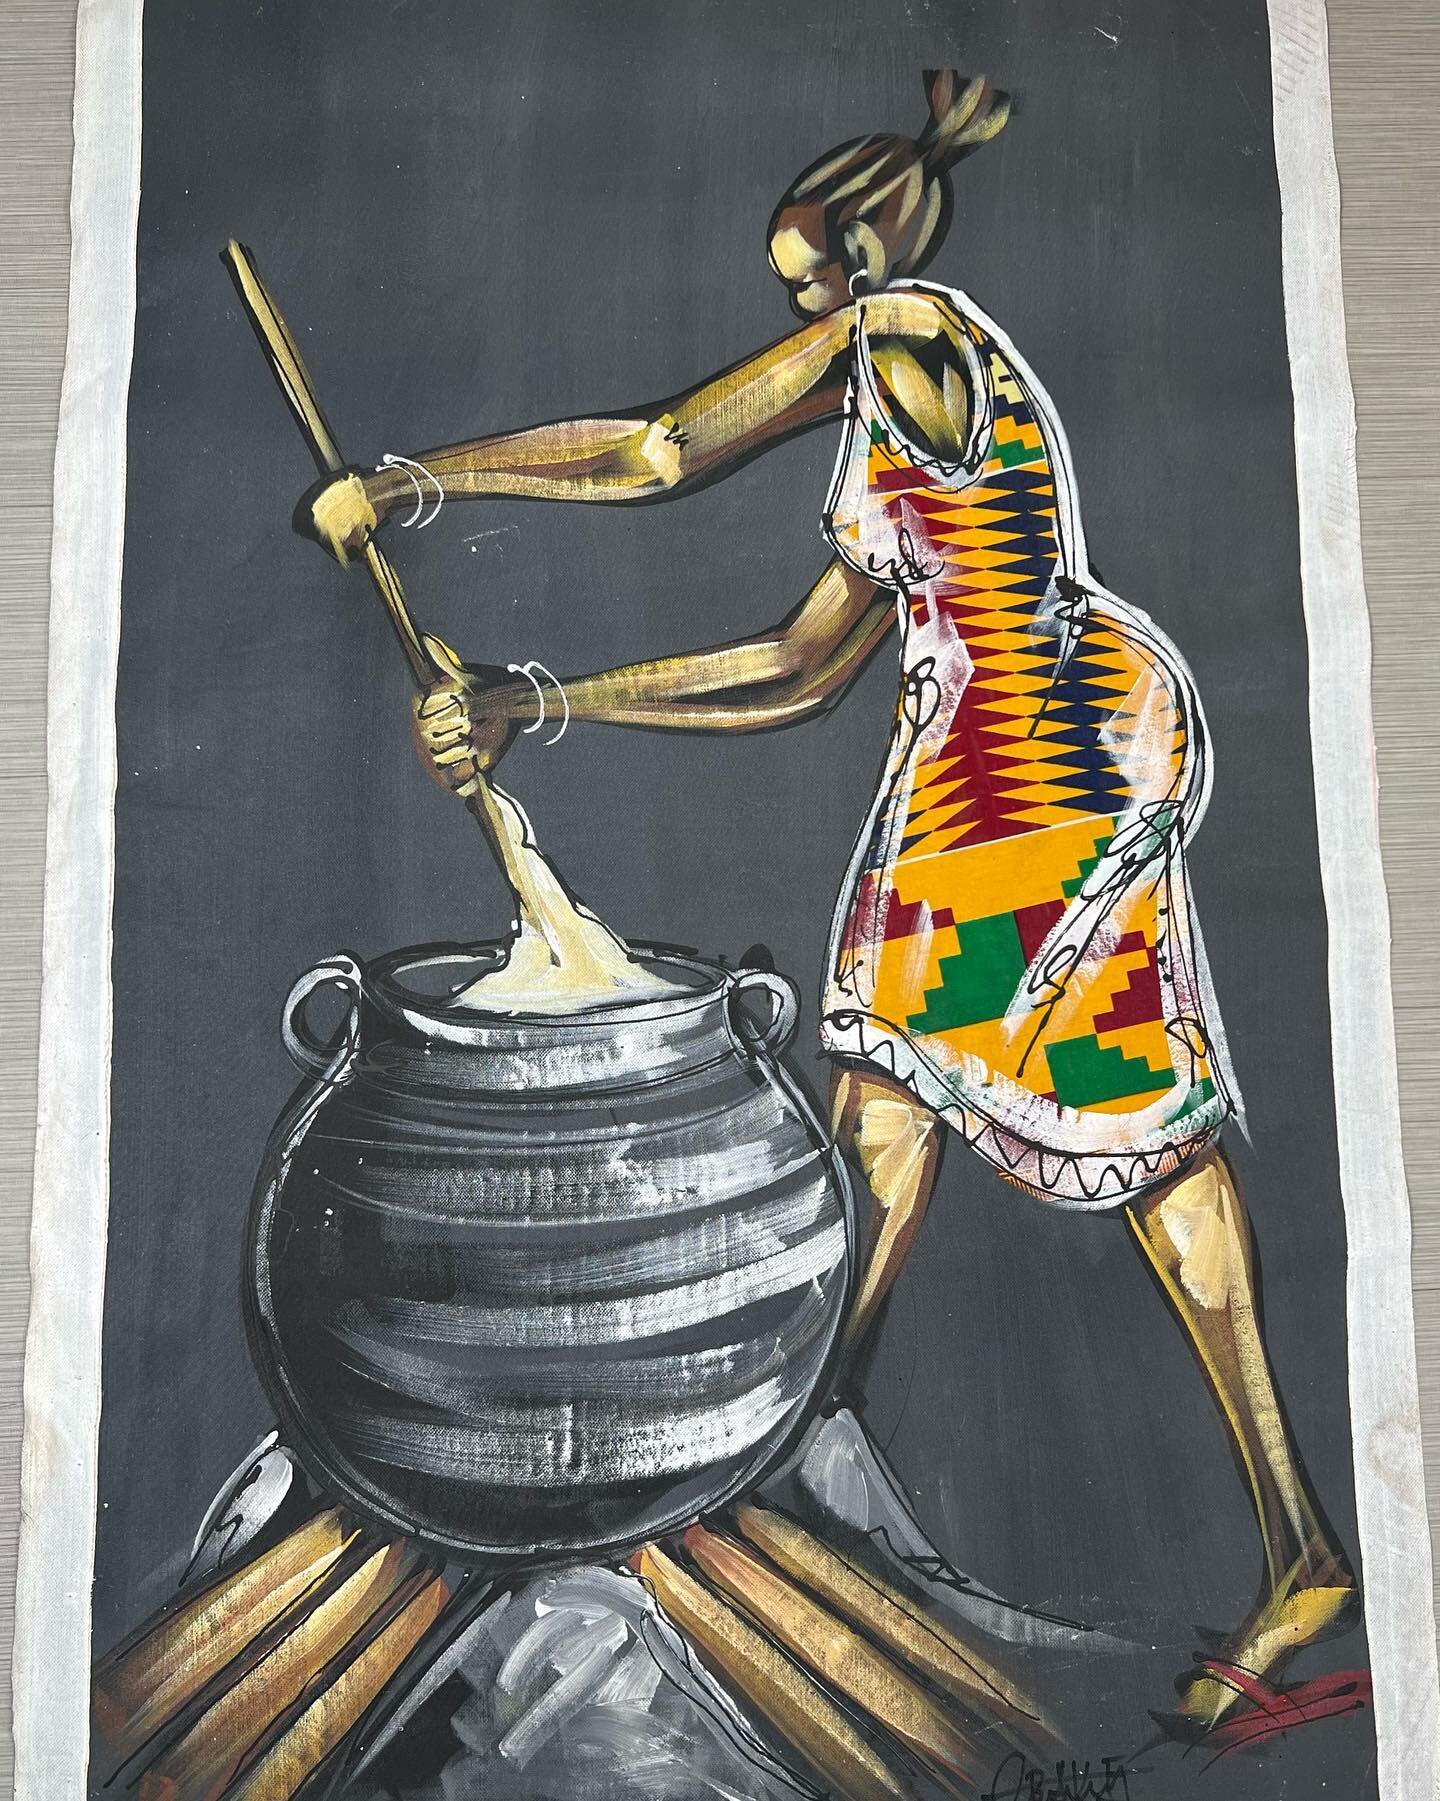 This one of one piece, located at www.richqueeraunties.com, depicts a Ghanian woman making Banku.

Banku is a mixture of fermented corn dough and cassava dough. It is cooked and assembled into single serving size balls and accompanies many Ghanian so